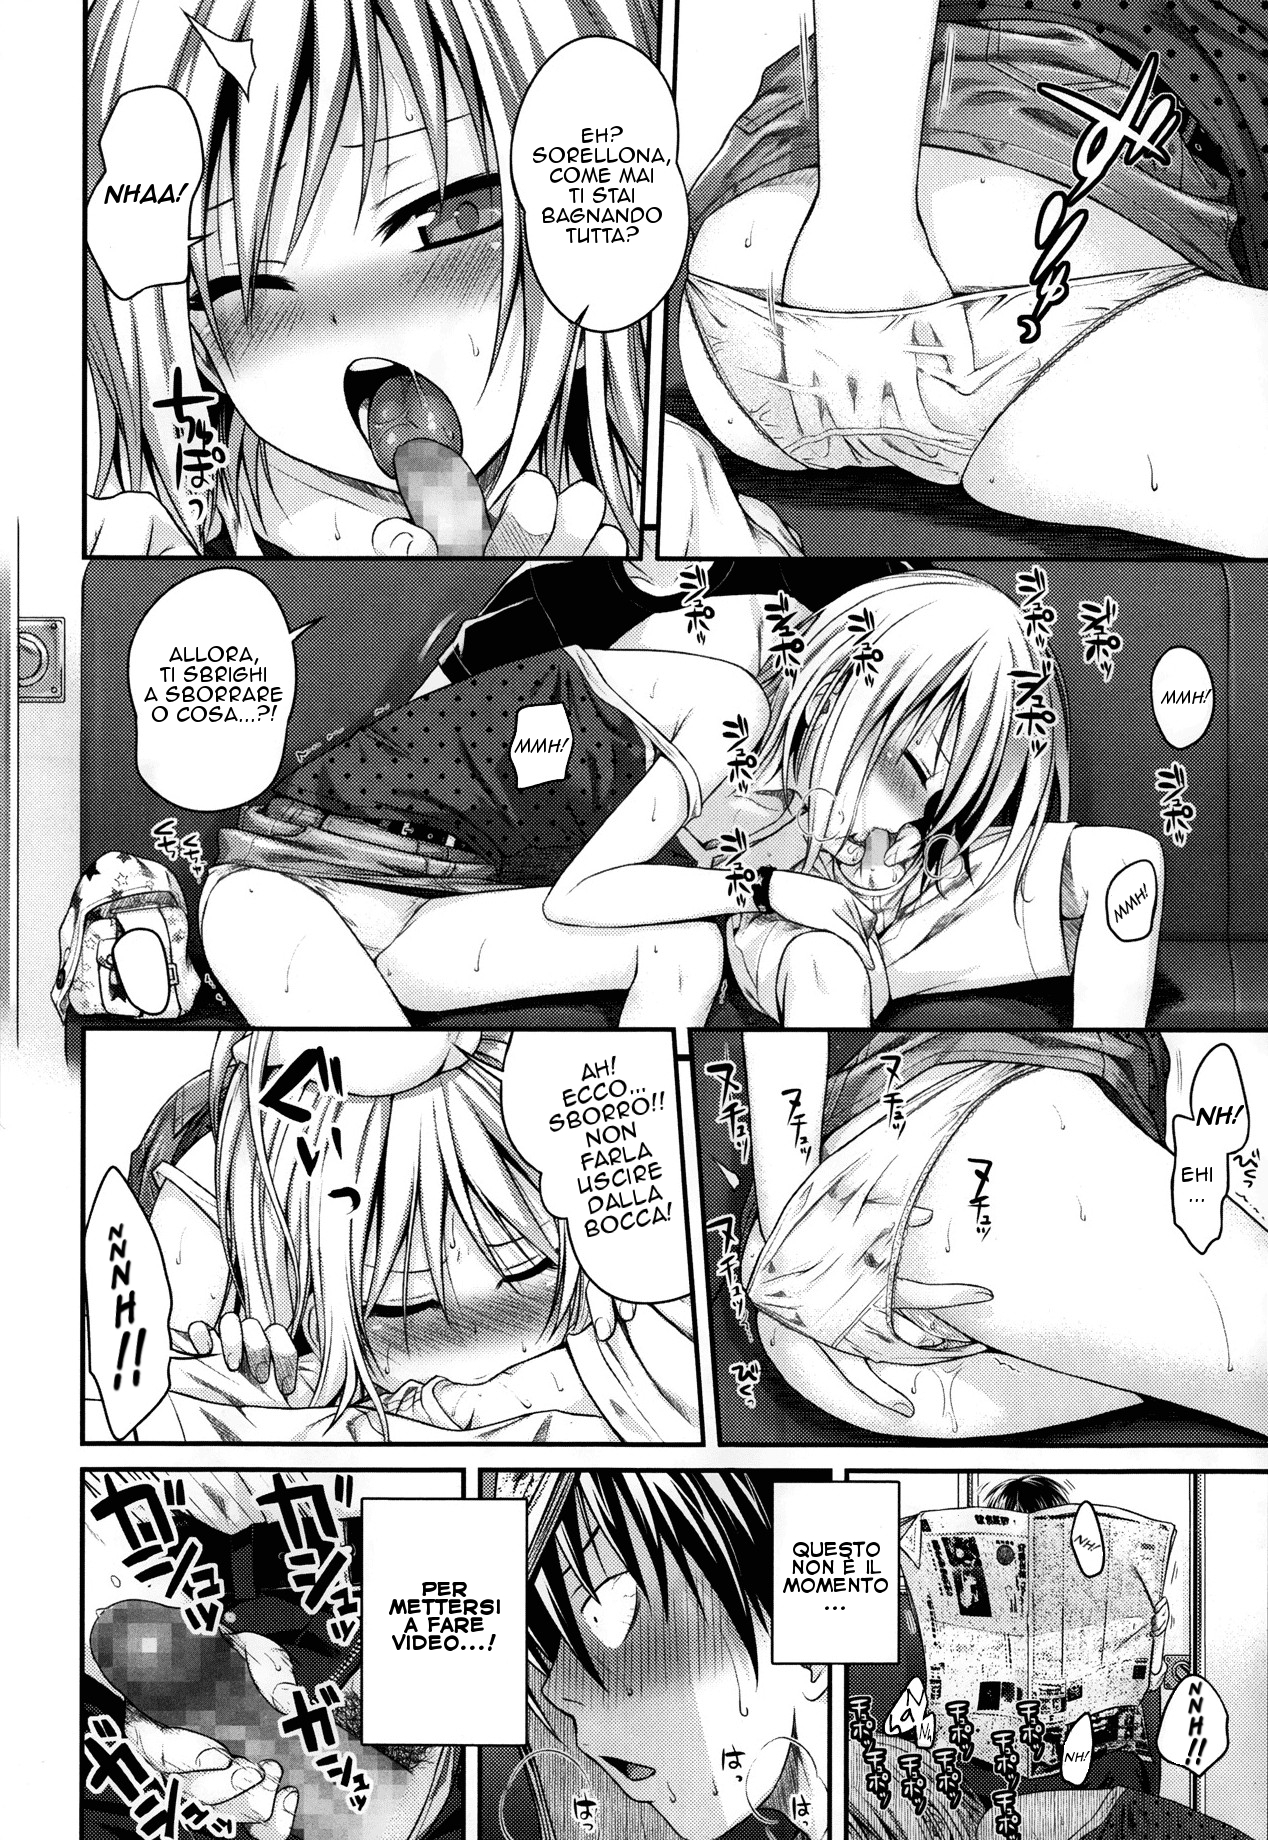 Siblings Sure Are Great Chapter Hentai Fantasy Reader